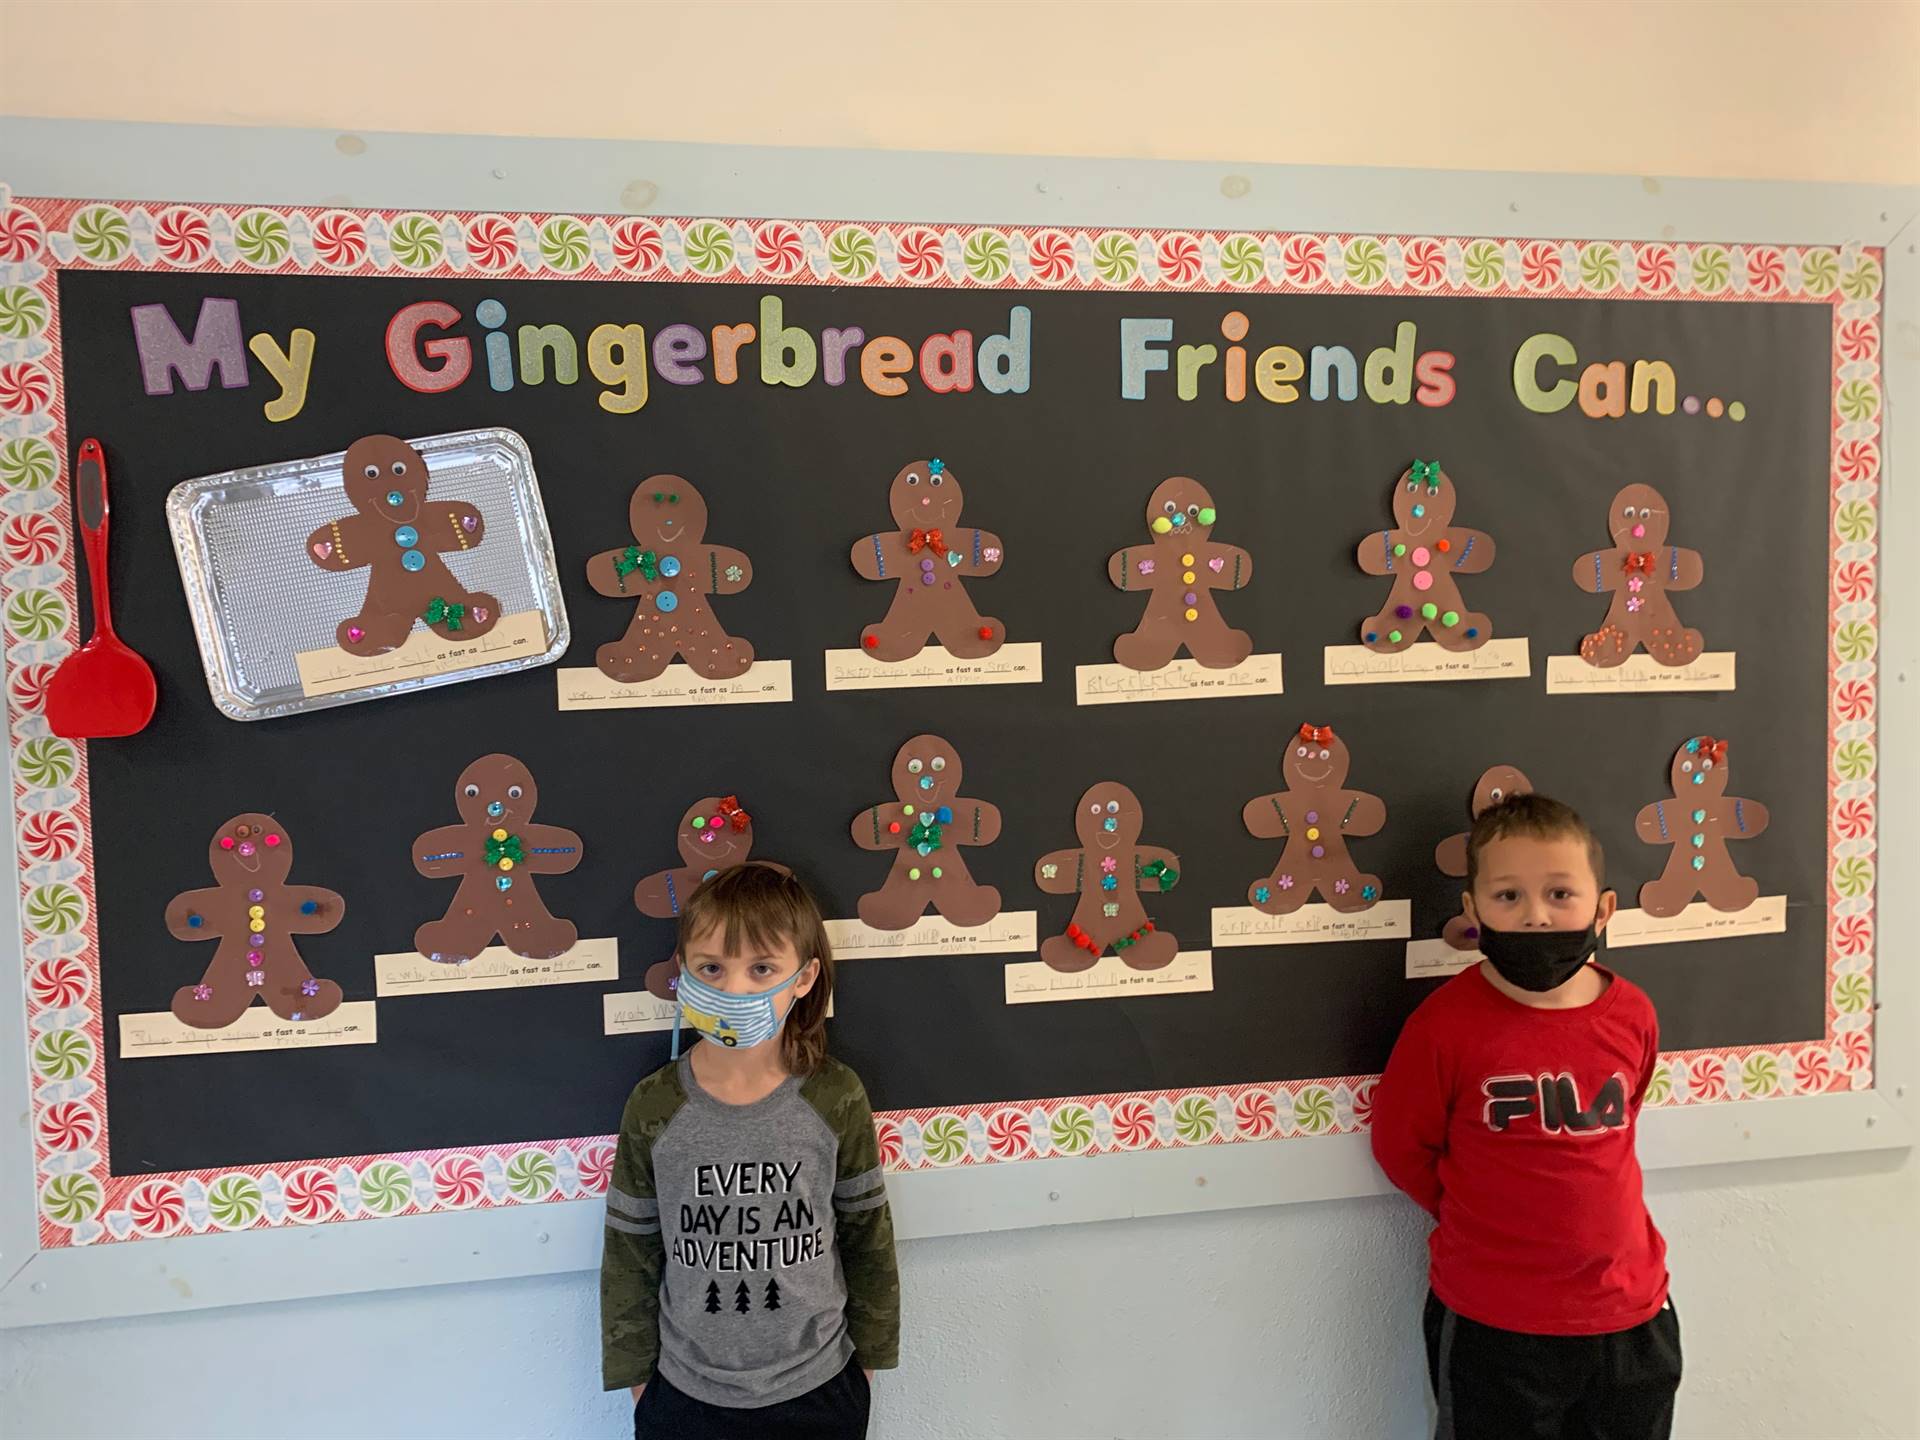 2 students stand in front of wall covered in decorated paper gingerbreads